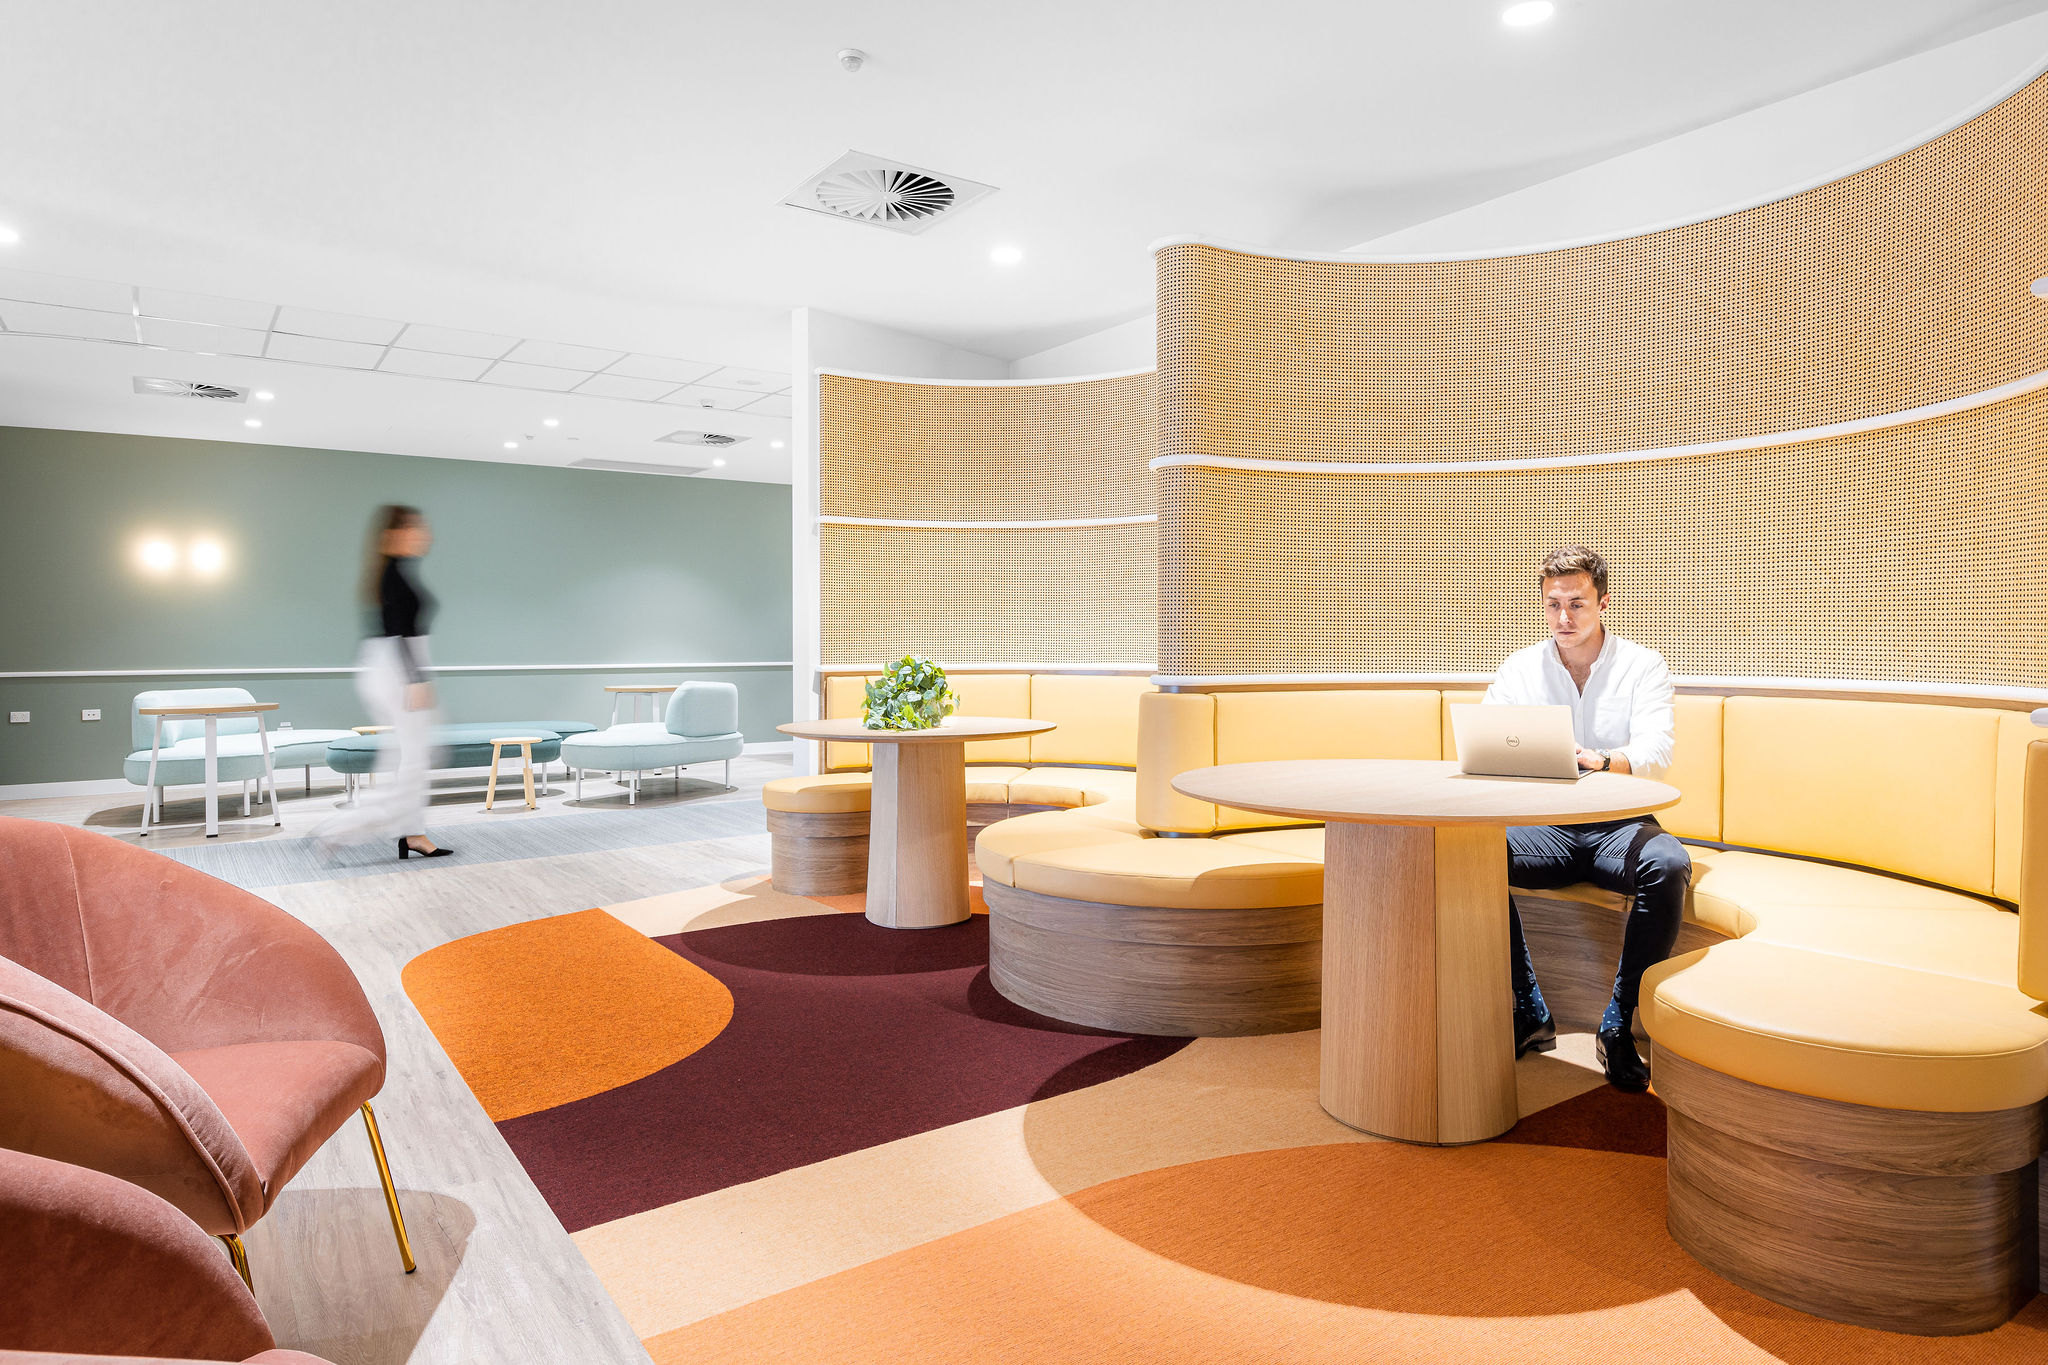 The Department of Transport and Main Roads Buderim Office Fitout